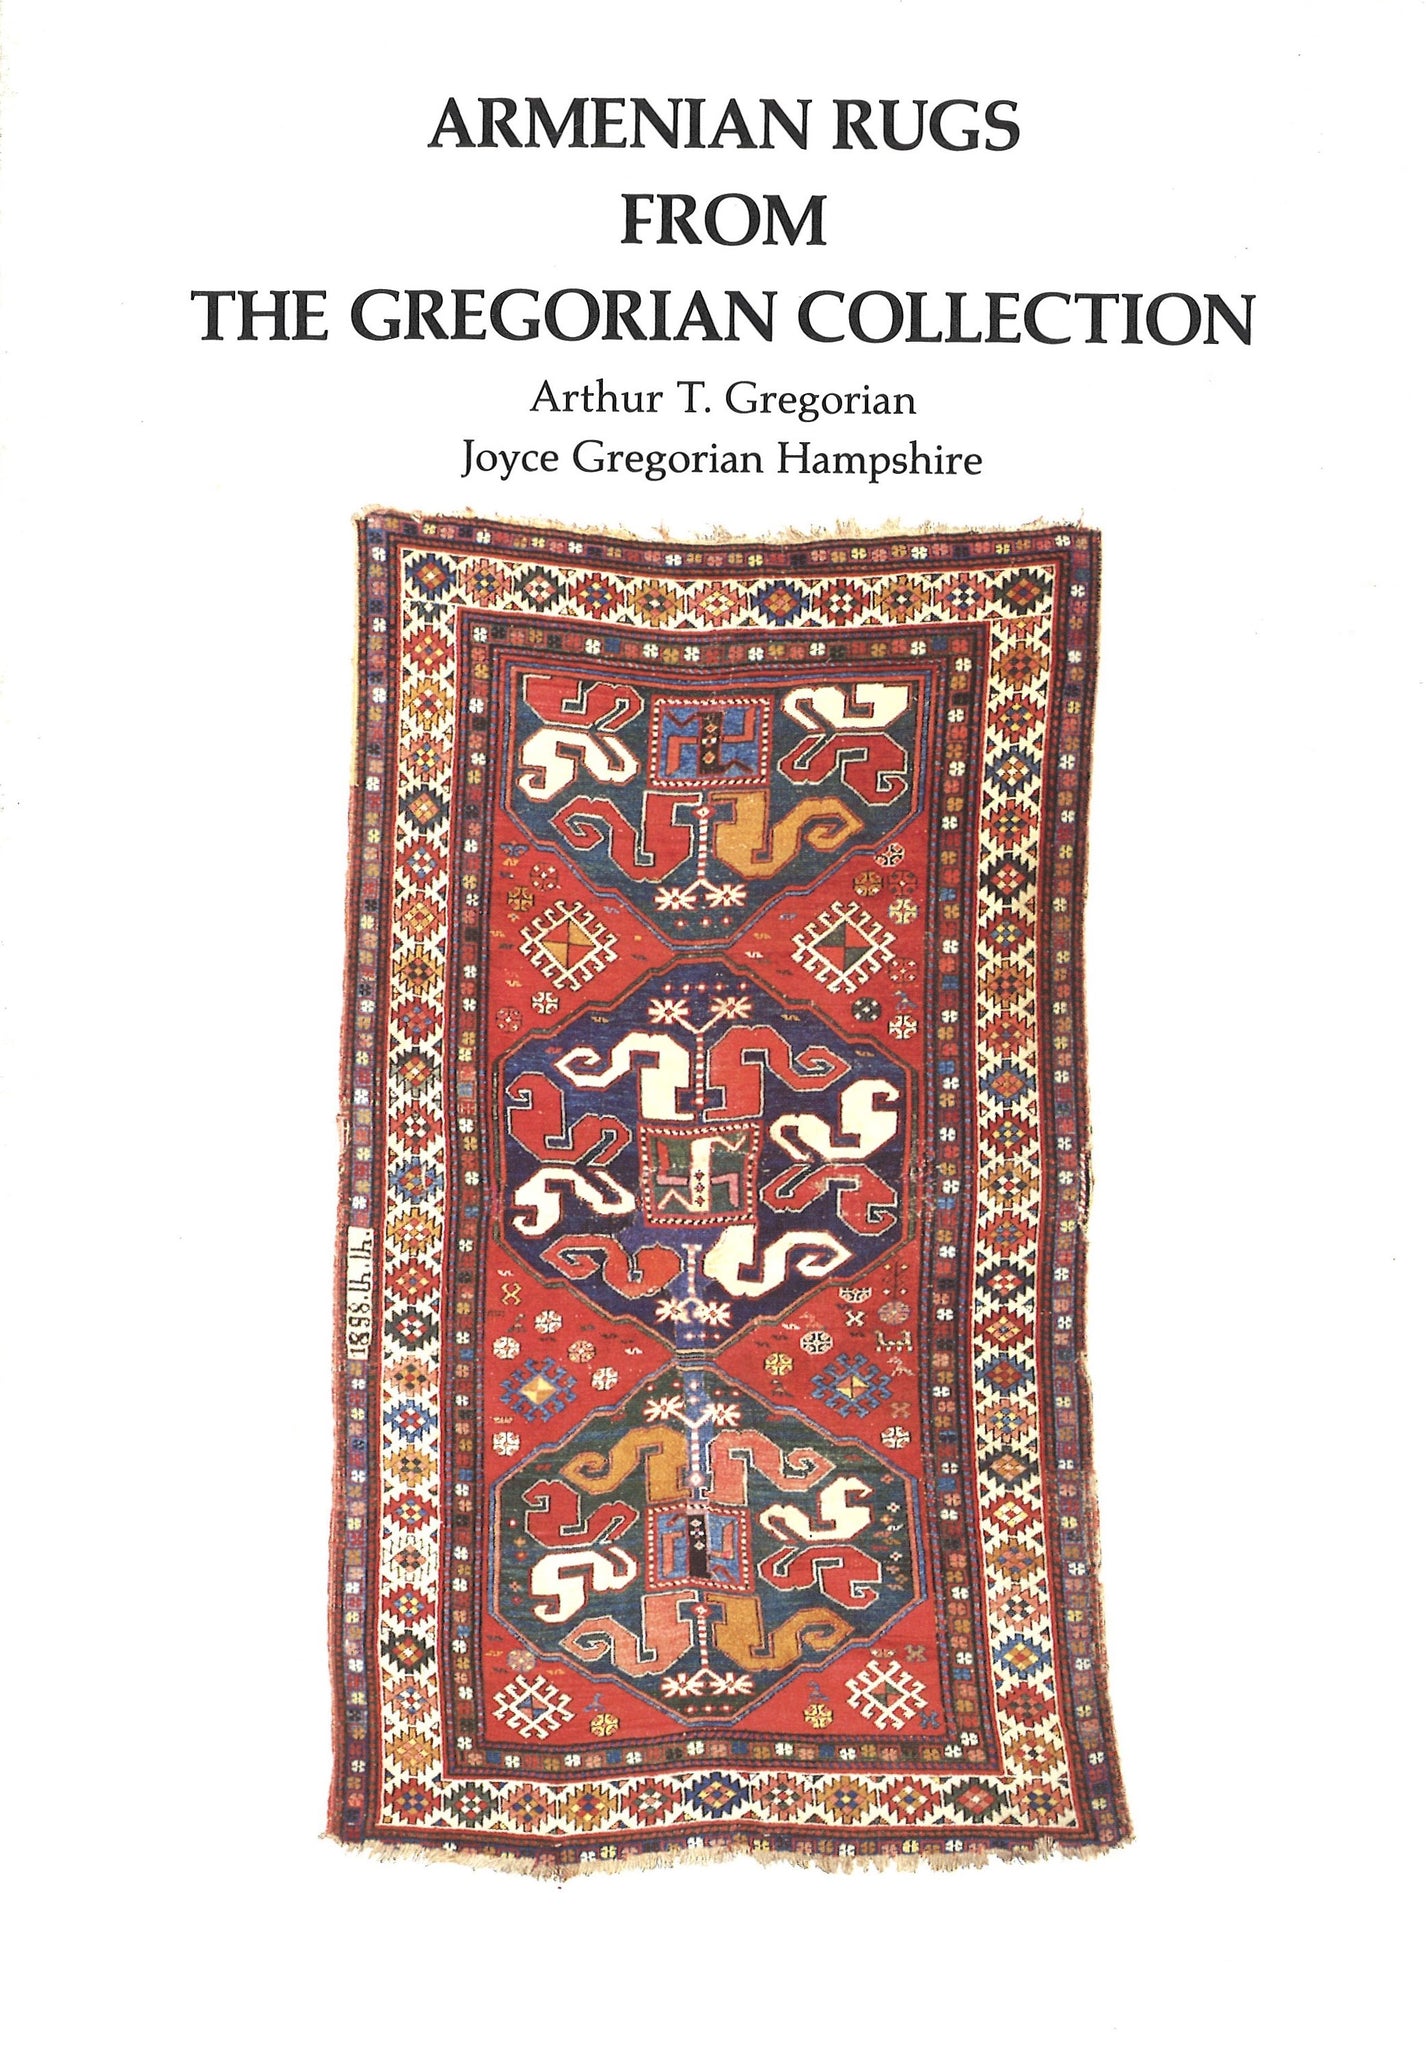 ARMENIAN RUGS FROM THE GREGORIAN COLLECTION